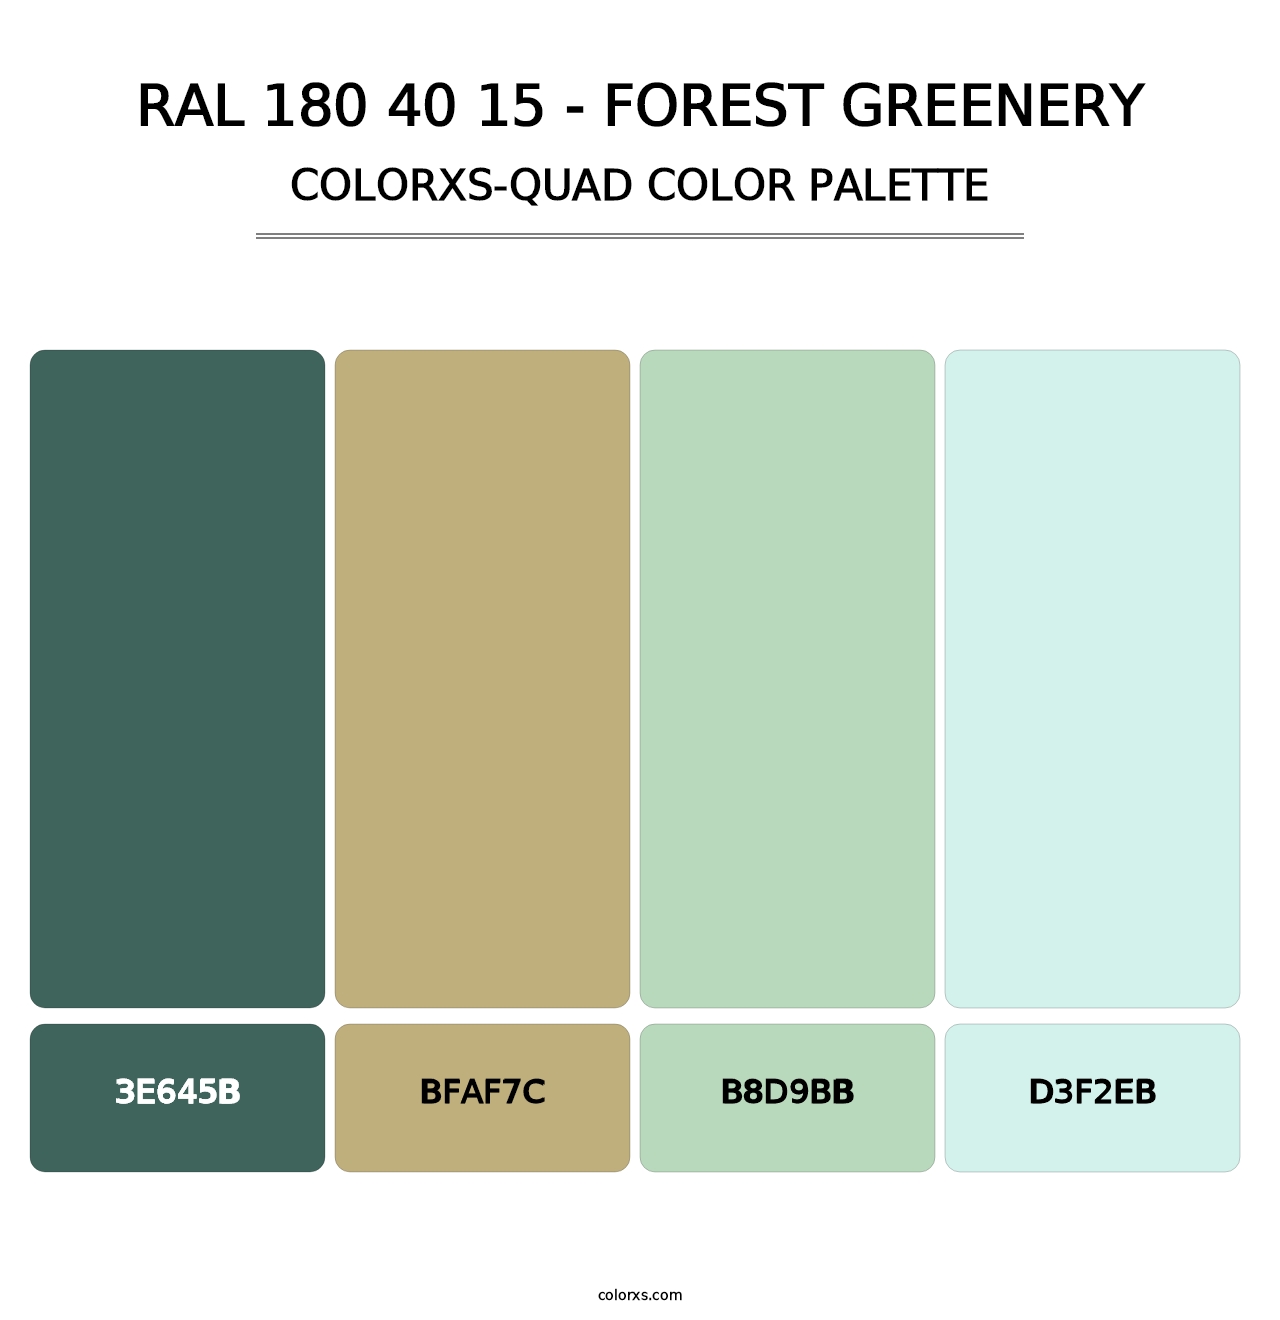 RAL 180 40 15 - Forest Greenery - Colorxs Quad Palette